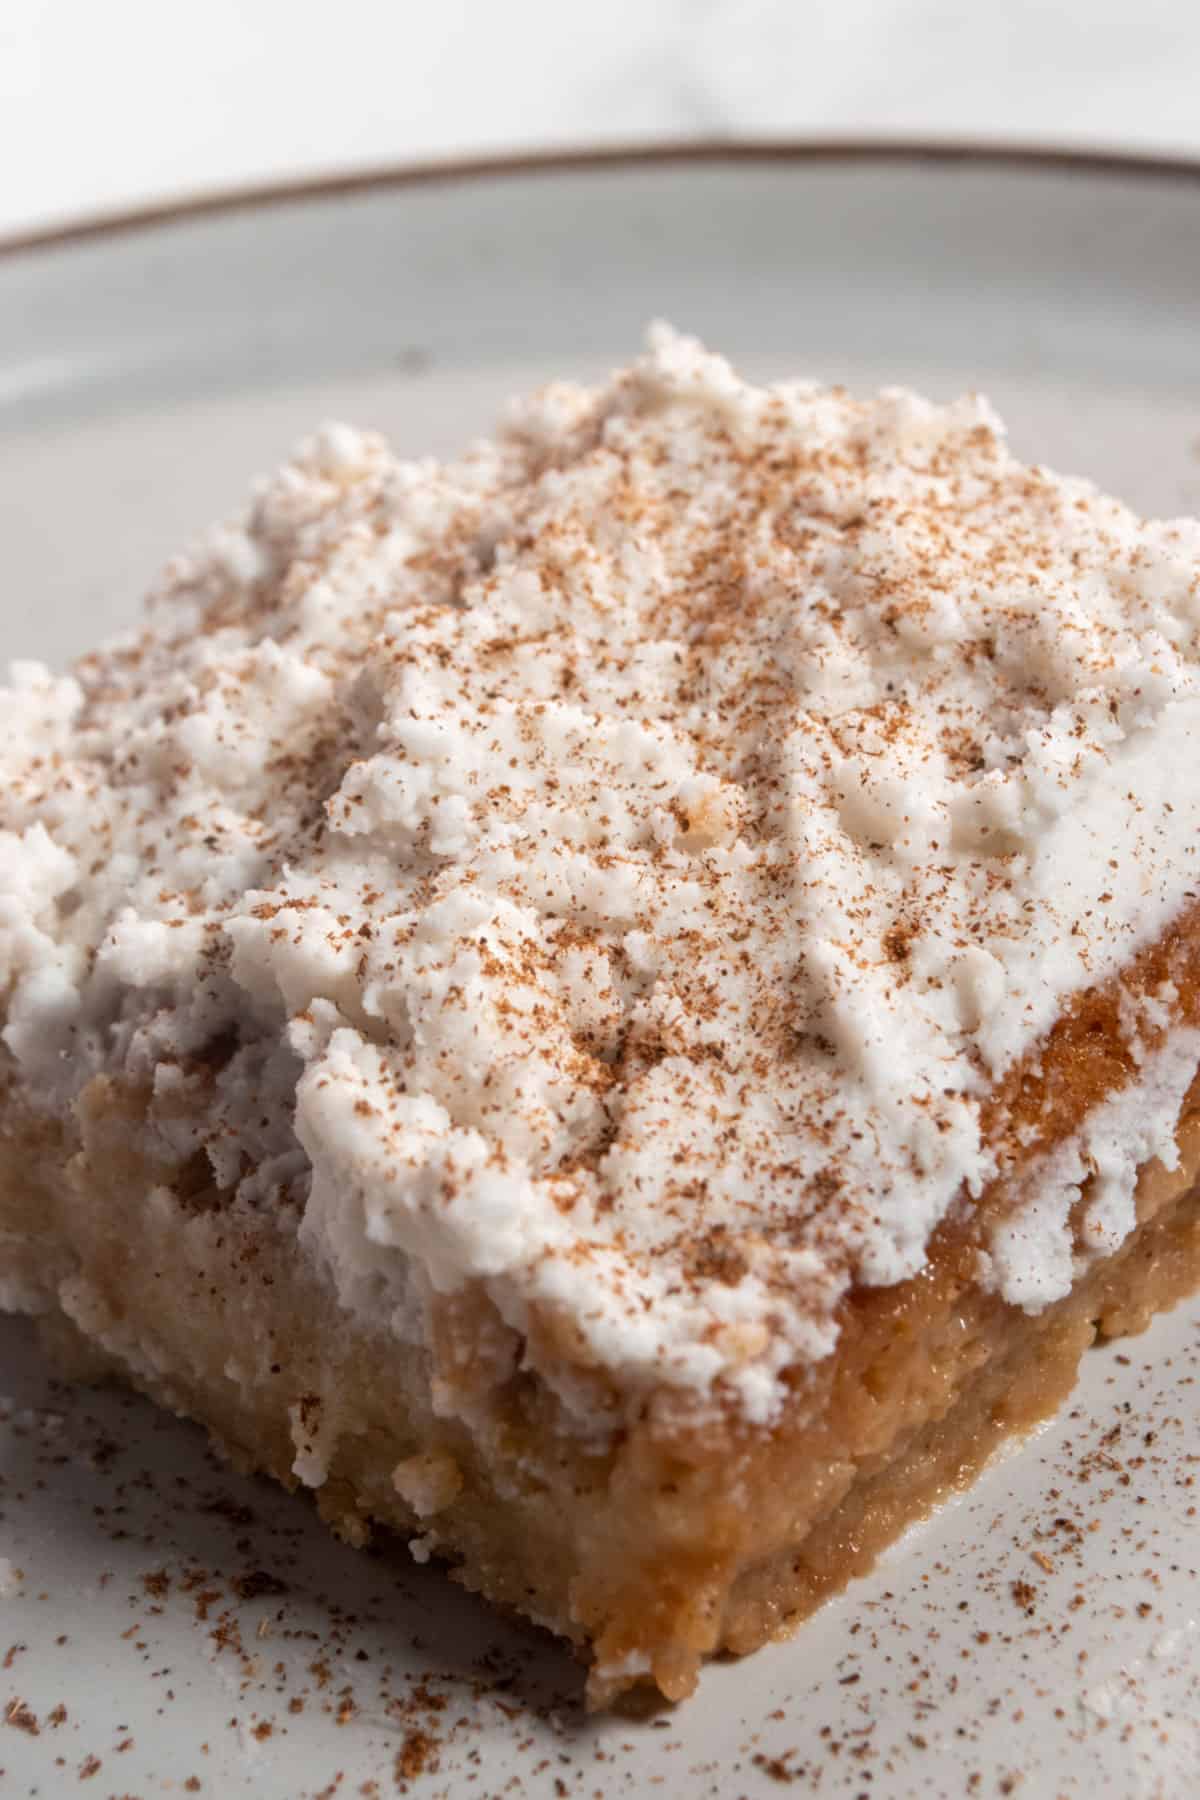 A large slice of tres leches cake on a serving saucer. Its is topped with vegan whipped cream and dusted with cinnamon.  